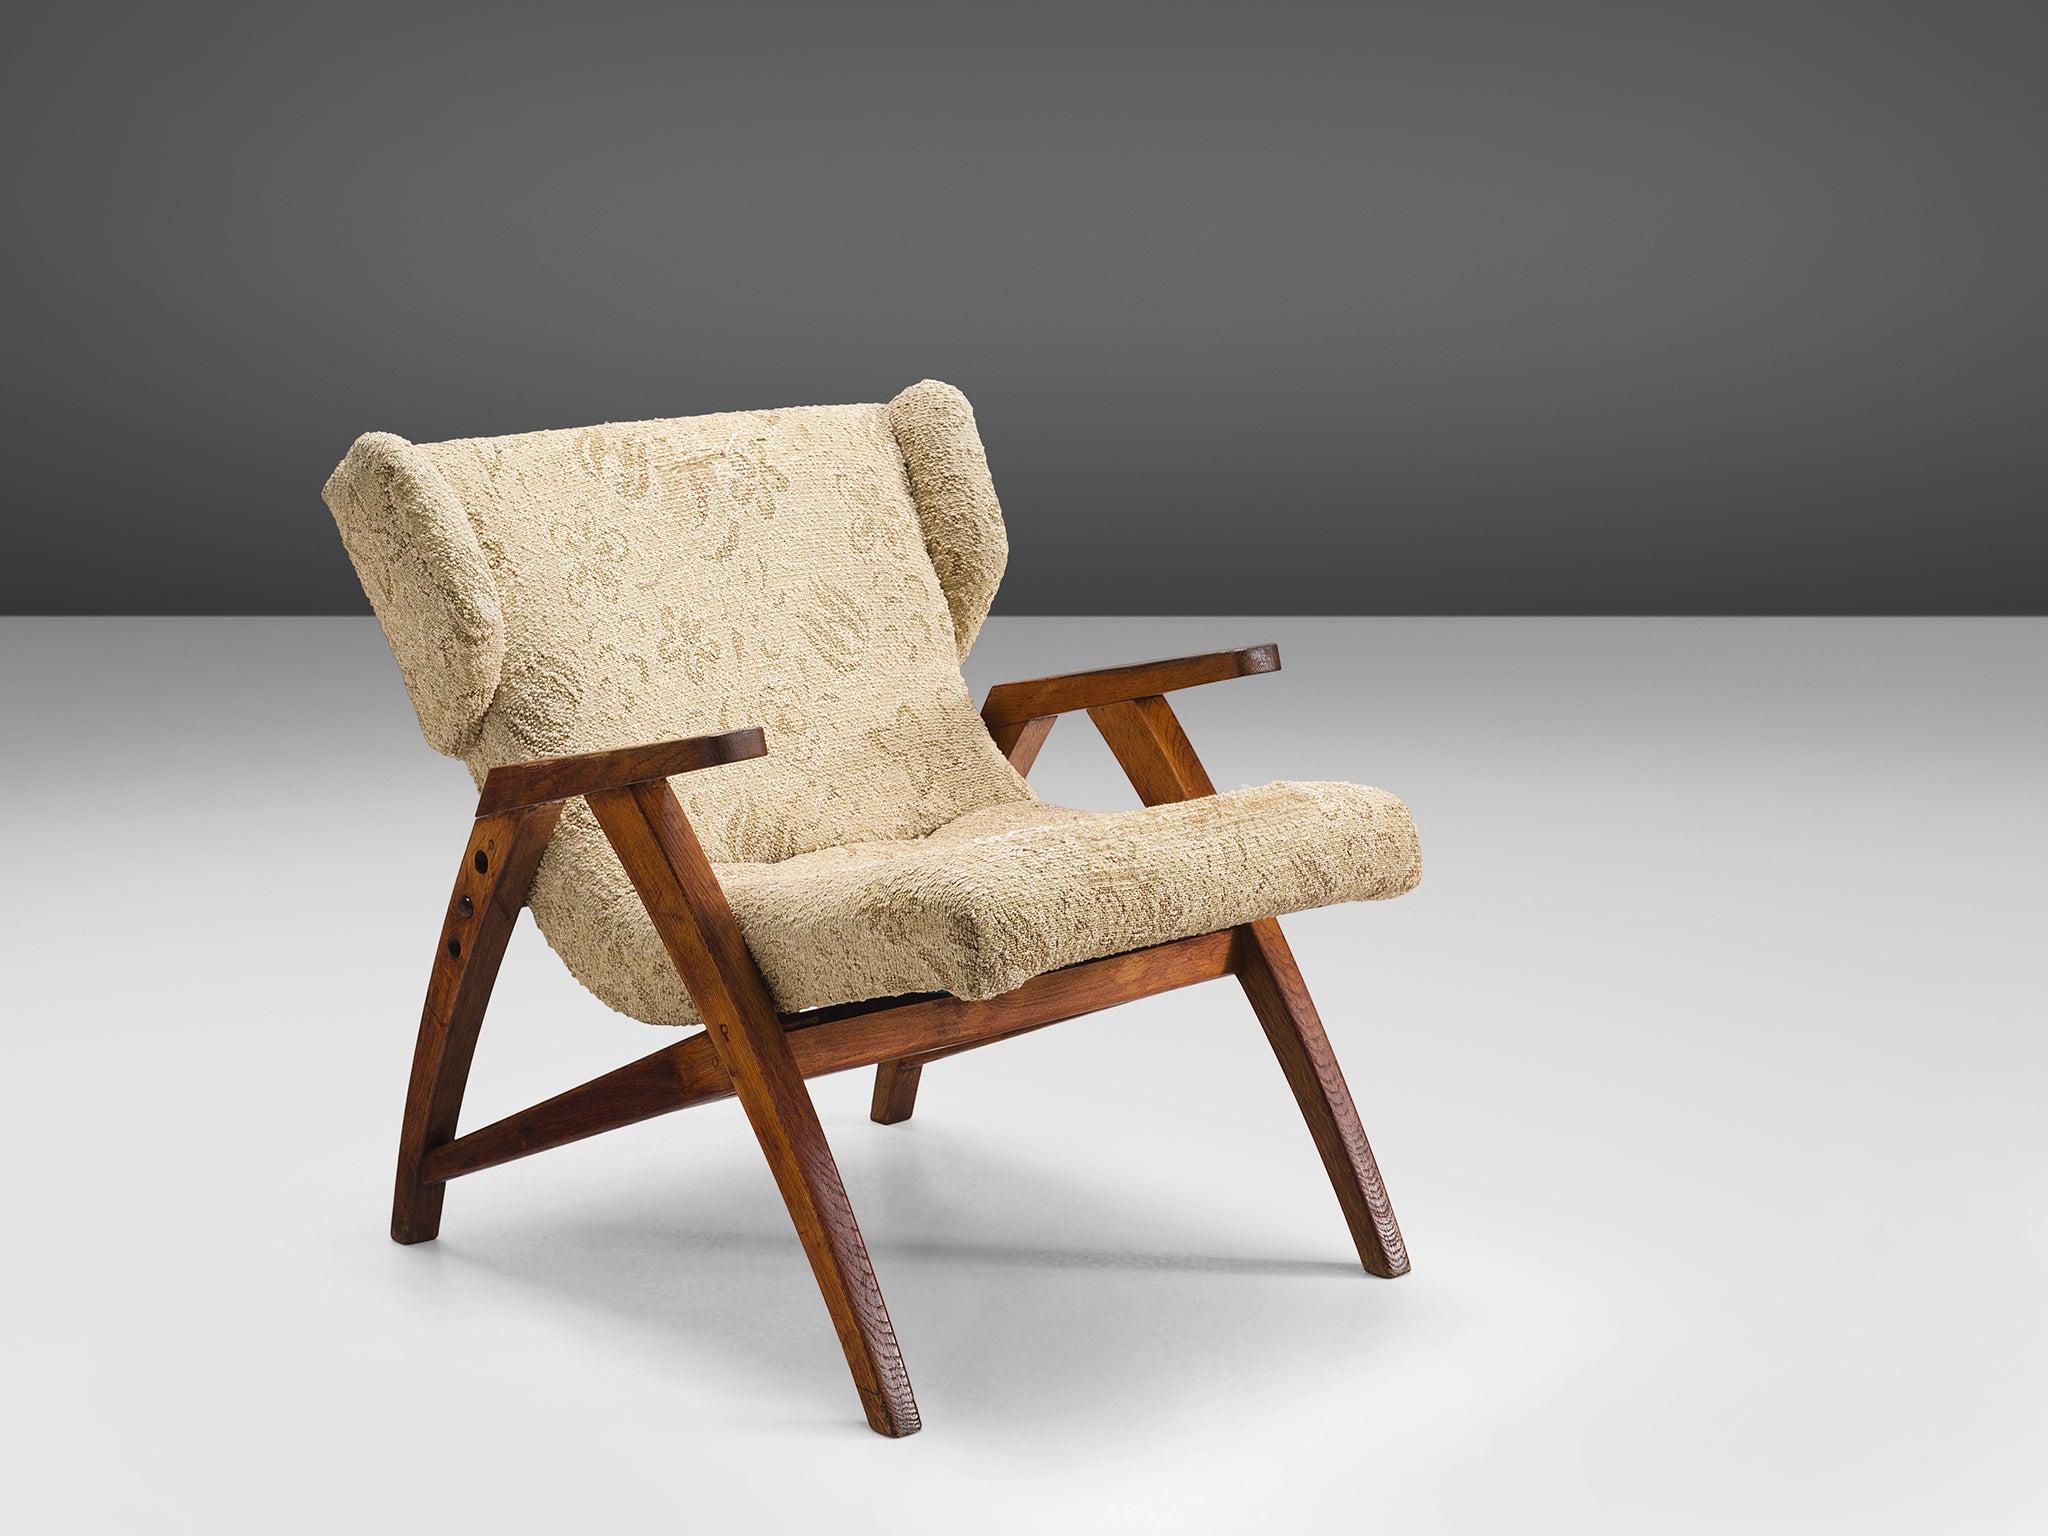 Easy chair, wood, beige brown fabric, oak, Czech Republic, 1940s.

This strong oak wingback chair is designed with a slightly sloped back in order to provide sitting comfort. The chair features small, geometric wings that are separated from the